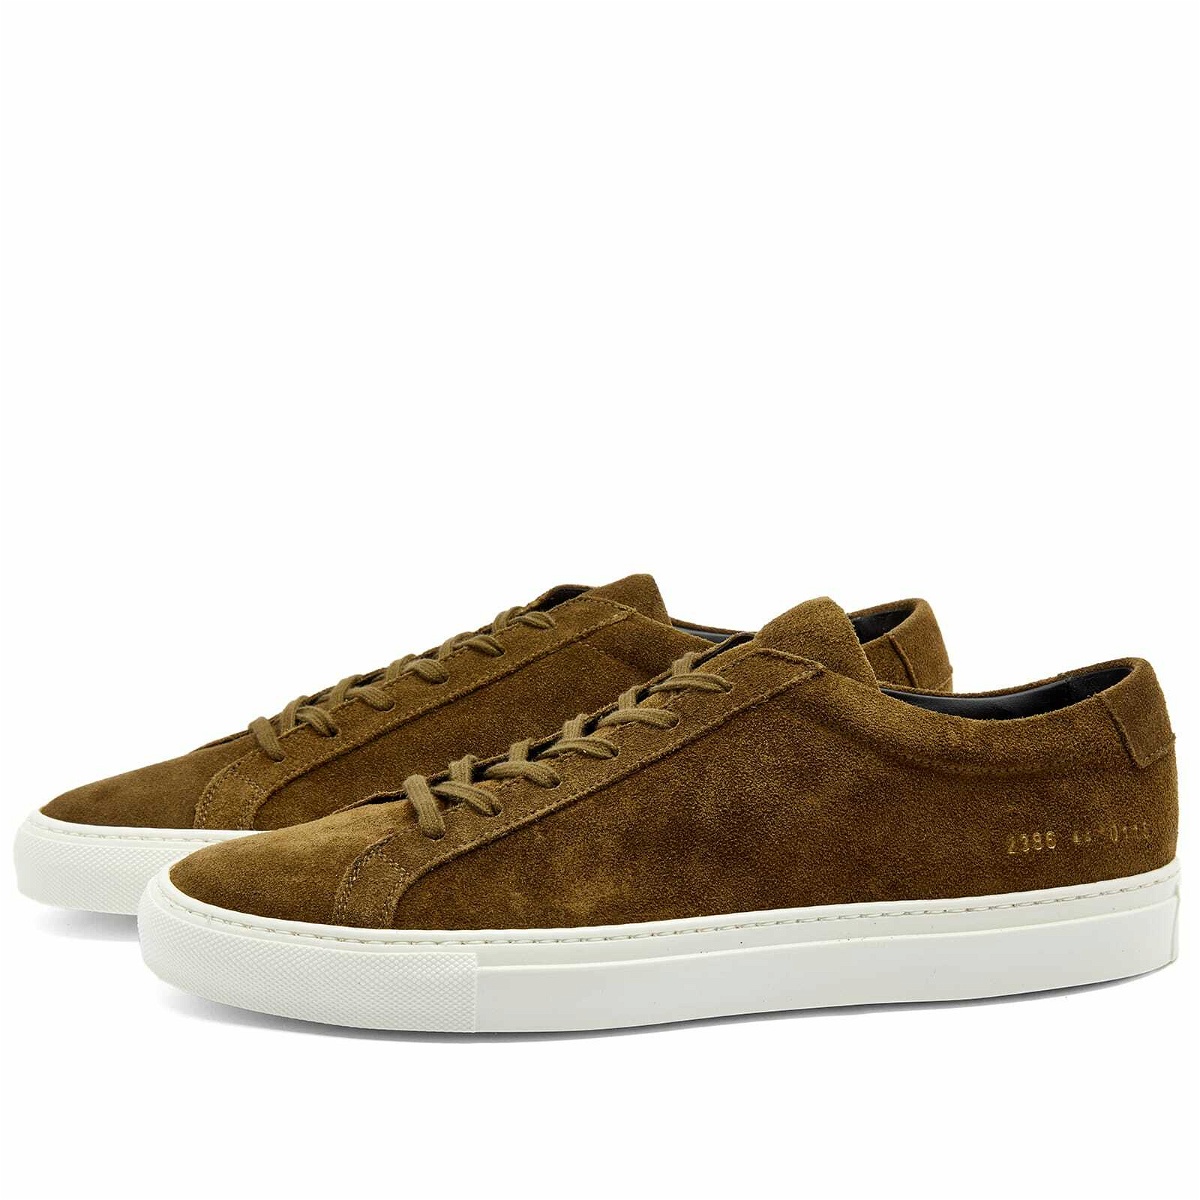 Common Projects Men's Achilles Low Waxed Suede Sneakers in Tobacco